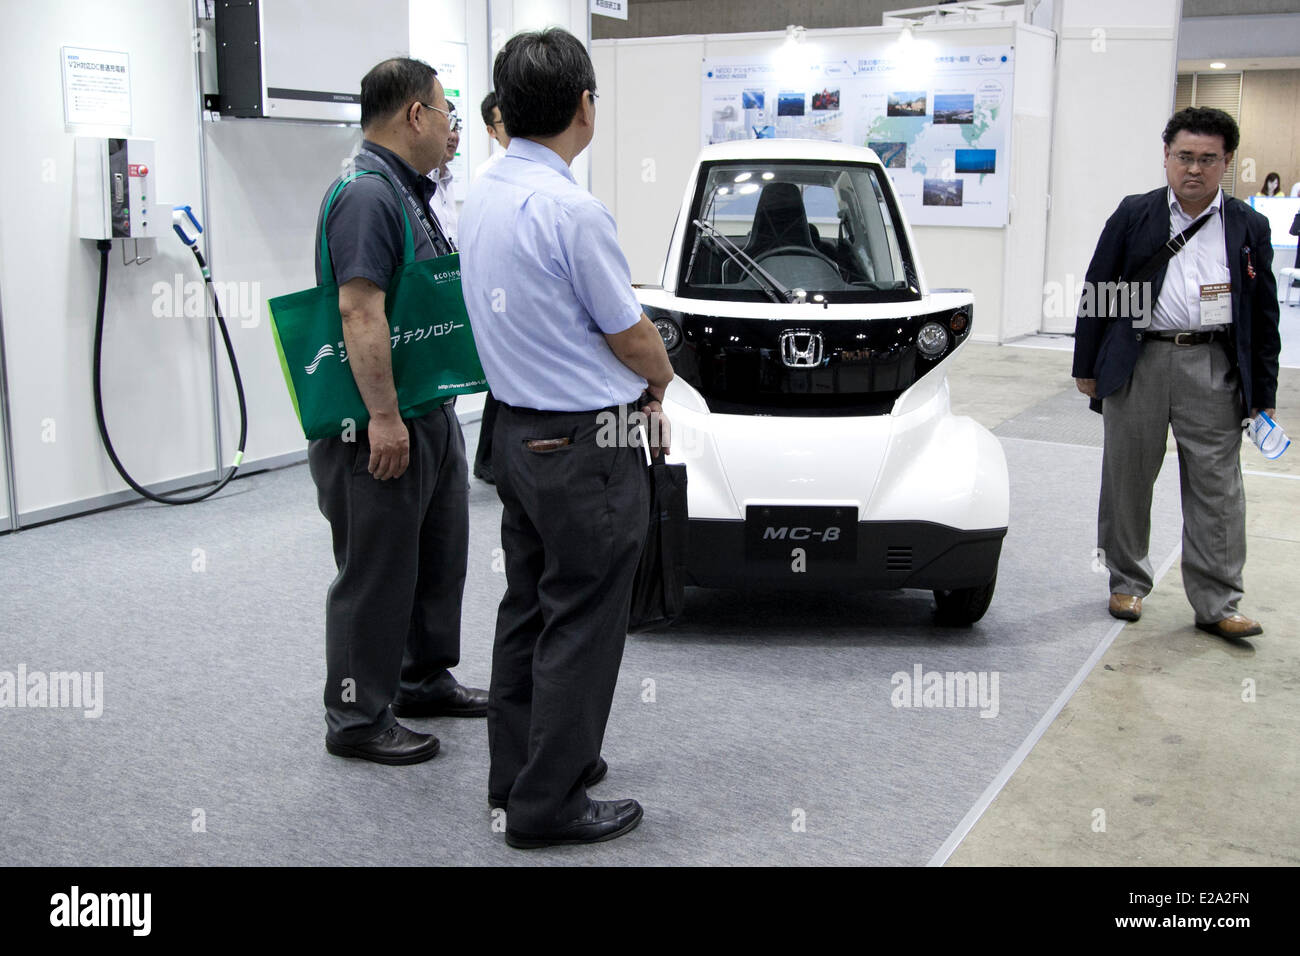 Tokyo, Japan. 18th June, 2014. – Visitors see the electric vehicle of Honda 'MC-B' at the Smart Community Japan 2014 in Tokyo Big Sight on June 18, 2014. The exhibition brings the latests products and technologies divided in 5 categories, 'Smart Community Exhibition', 'Biomass Expo', 'Next Generation Vehicle Exhibition, and newly-created 'Community Cloud 2014', which introduces technology for urban development. This year 229 enterprises and organizations shows their products from June 18th to 20th. Credit:  Aflo Co. Ltd./Alamy Live News Stock Photo